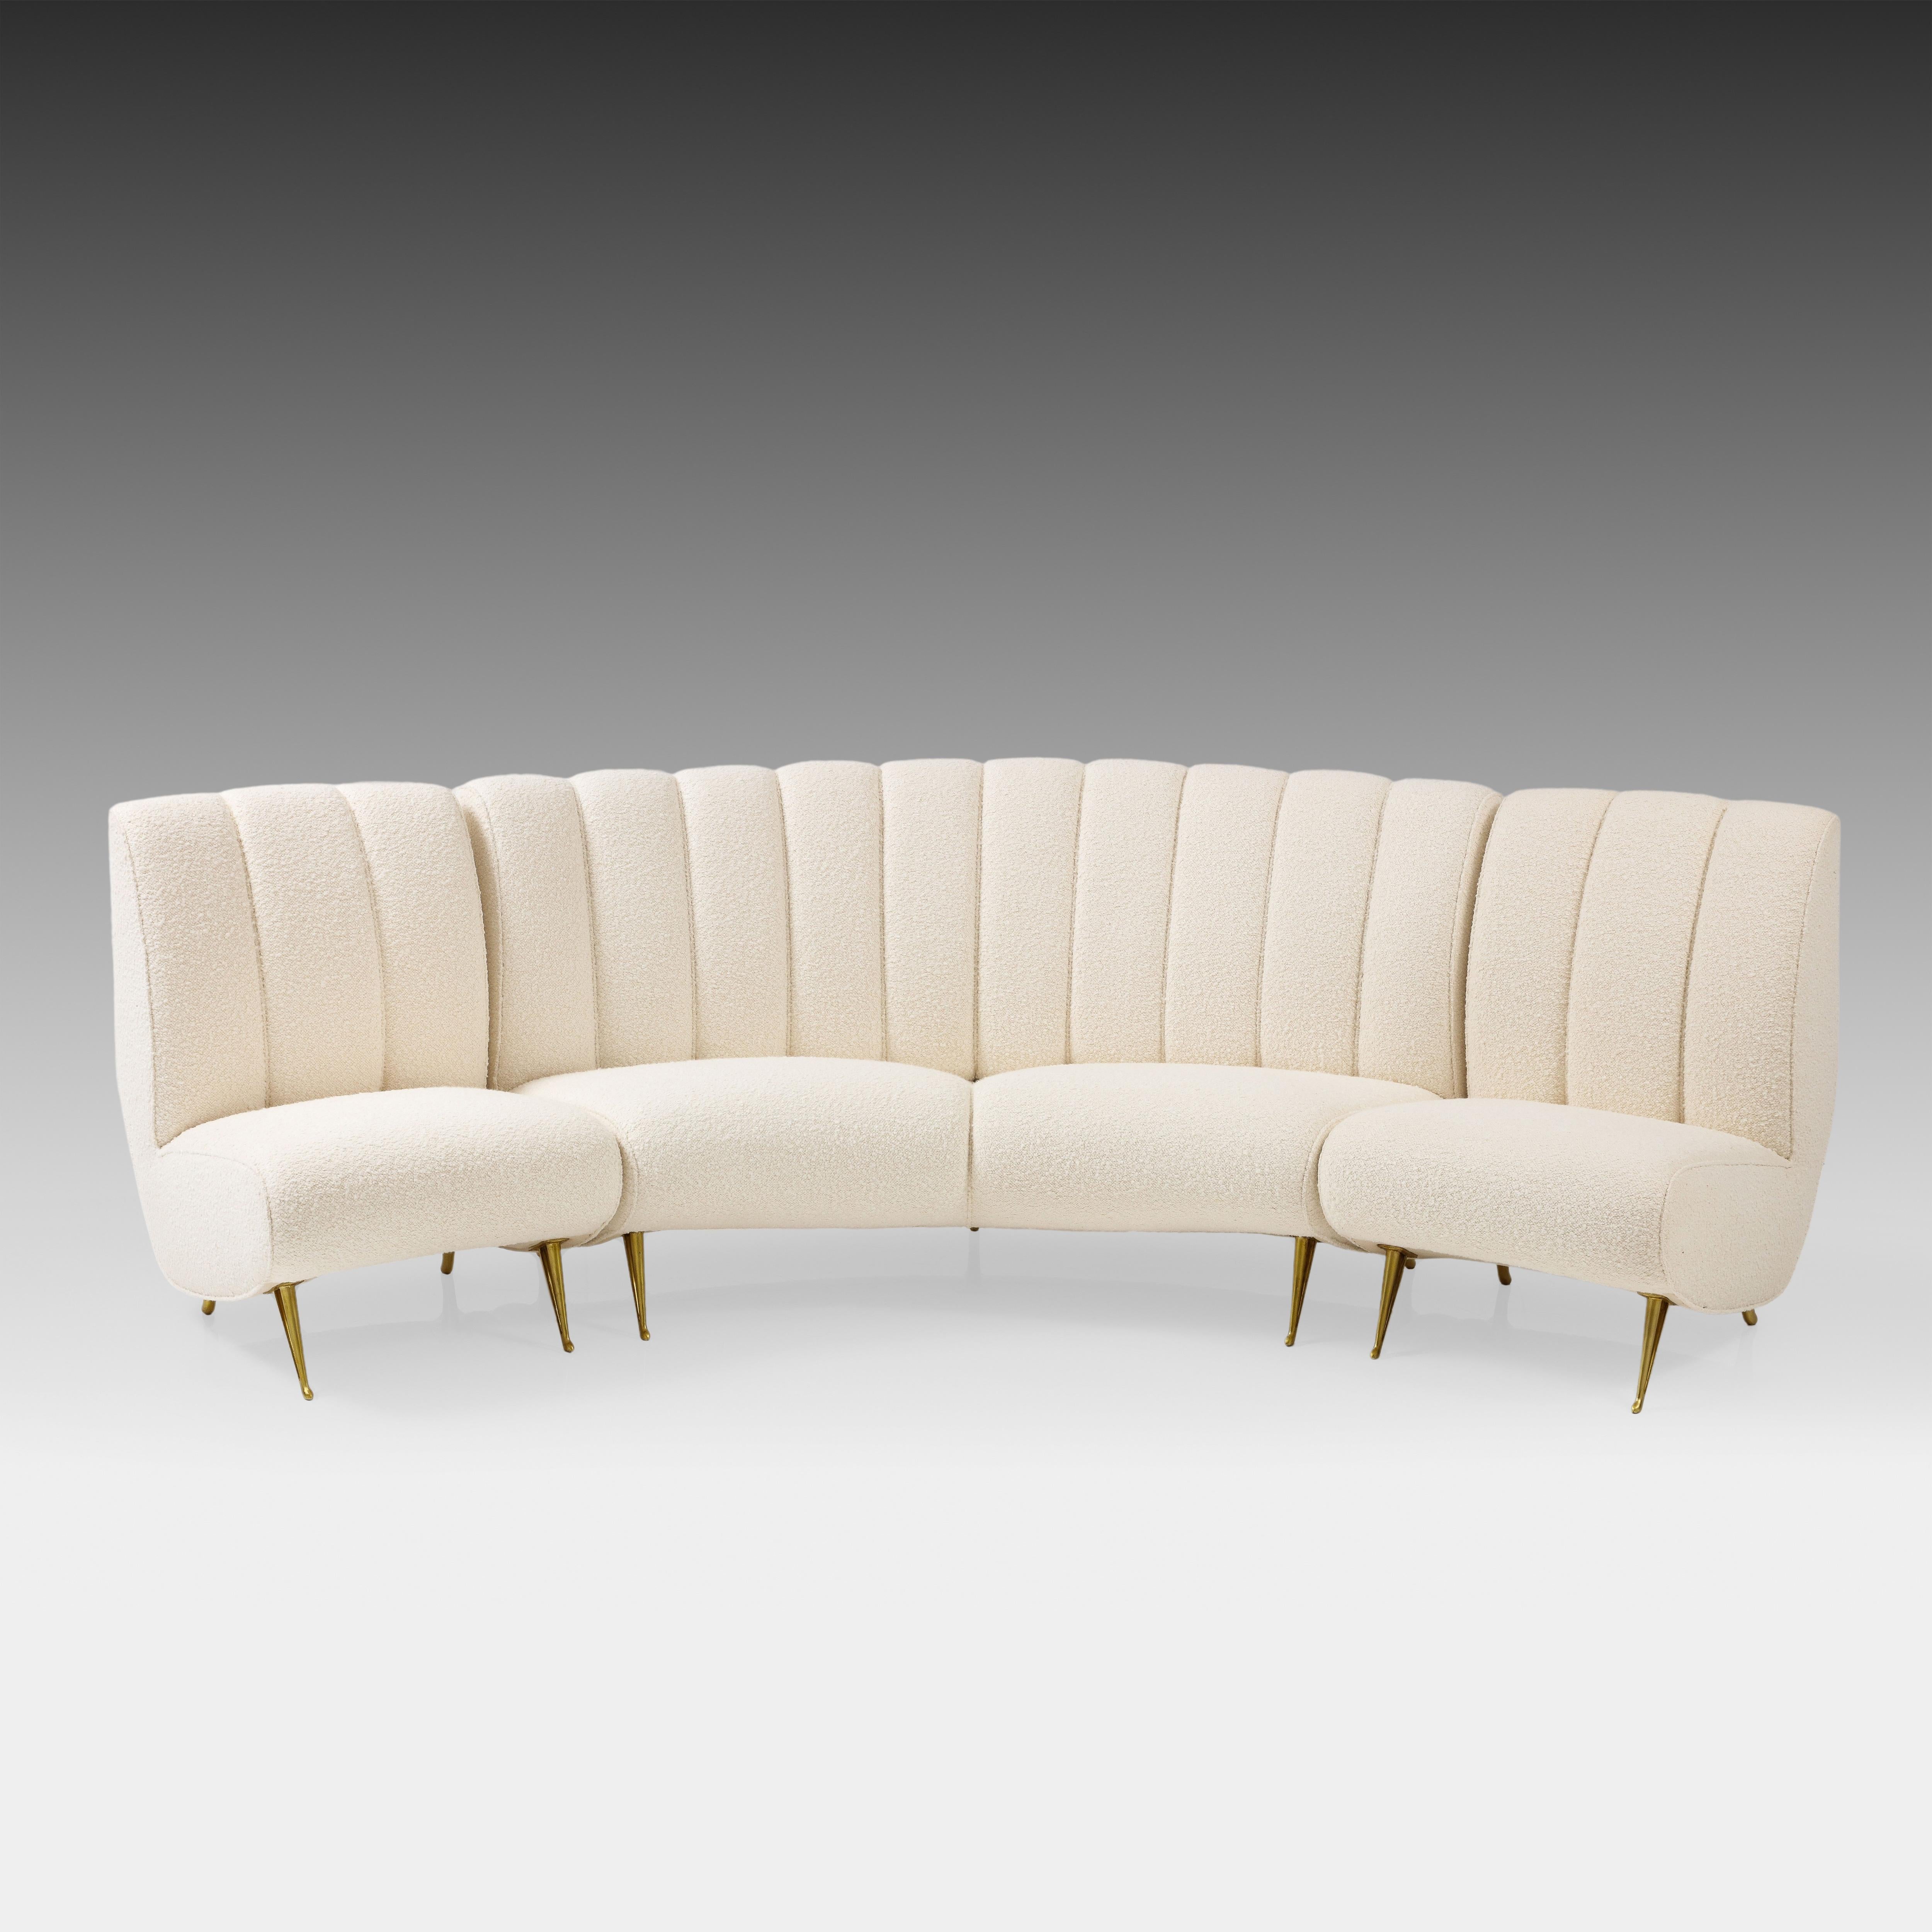 ISA Bergamo Rare Curved Settee in Ivory Bouclé, Italy, 1950s For Sale 8